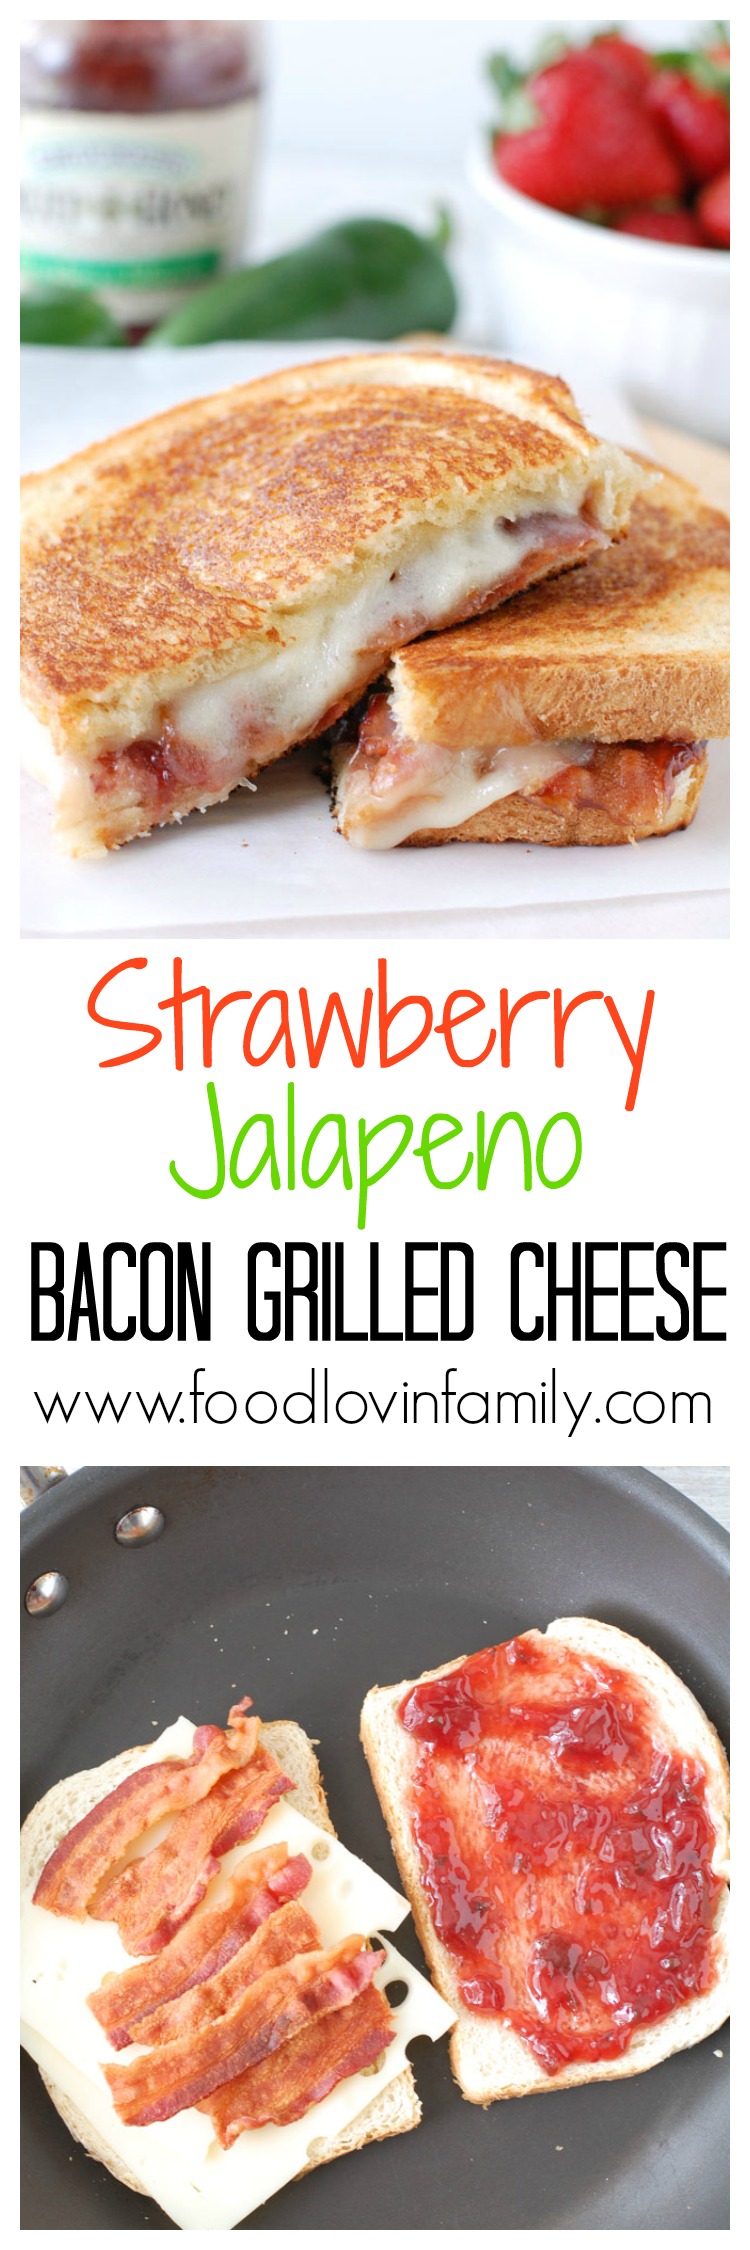 This Strawberry Jalapeno Bacon Grilled Cheese Sandwich is a crunchy, gooey combination of savory, sweet, and salty with just a touch of heat. To the delight of taste buds everywhere, sourdough bread, bacon, Swiss cheese and strawberry jalapeno fruit spread join together to create this tasty sandwich!